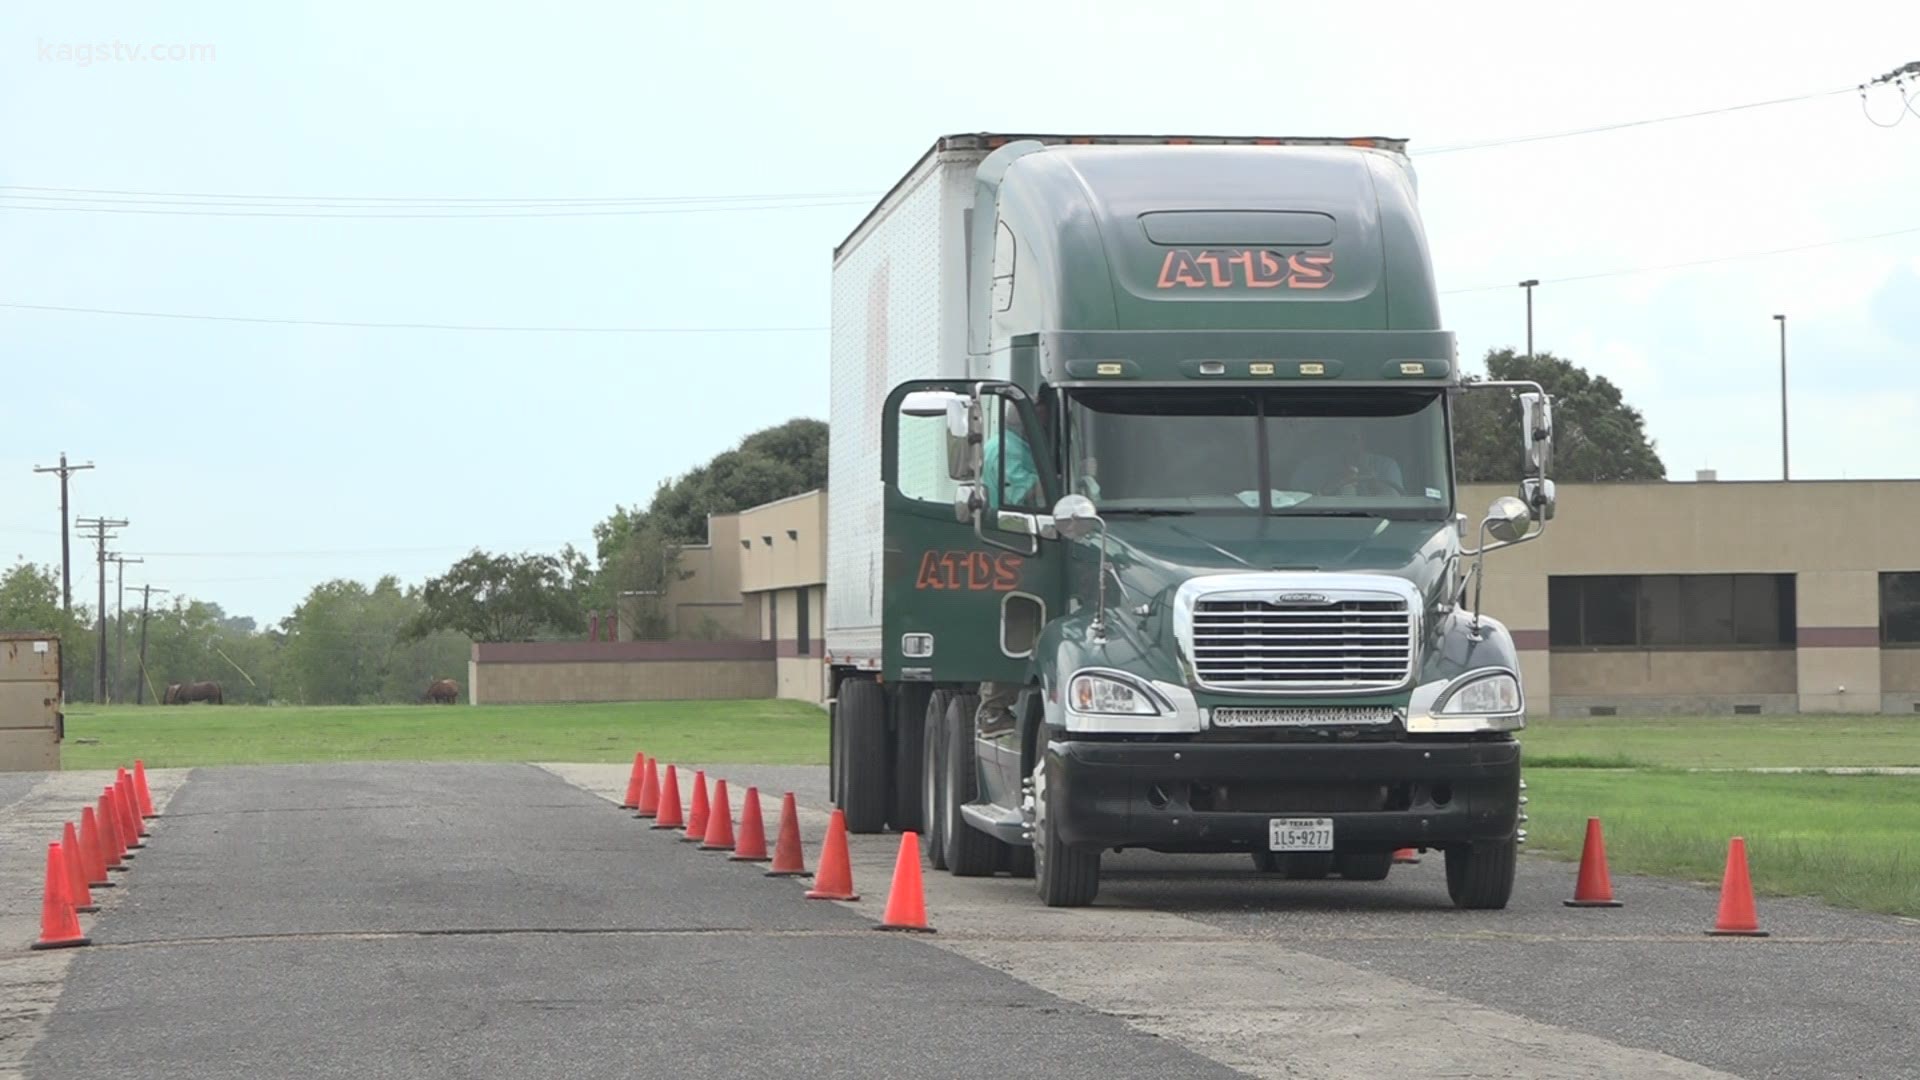 The five-week course helps students obtain their commercial driver's license and land a job in truck driving.